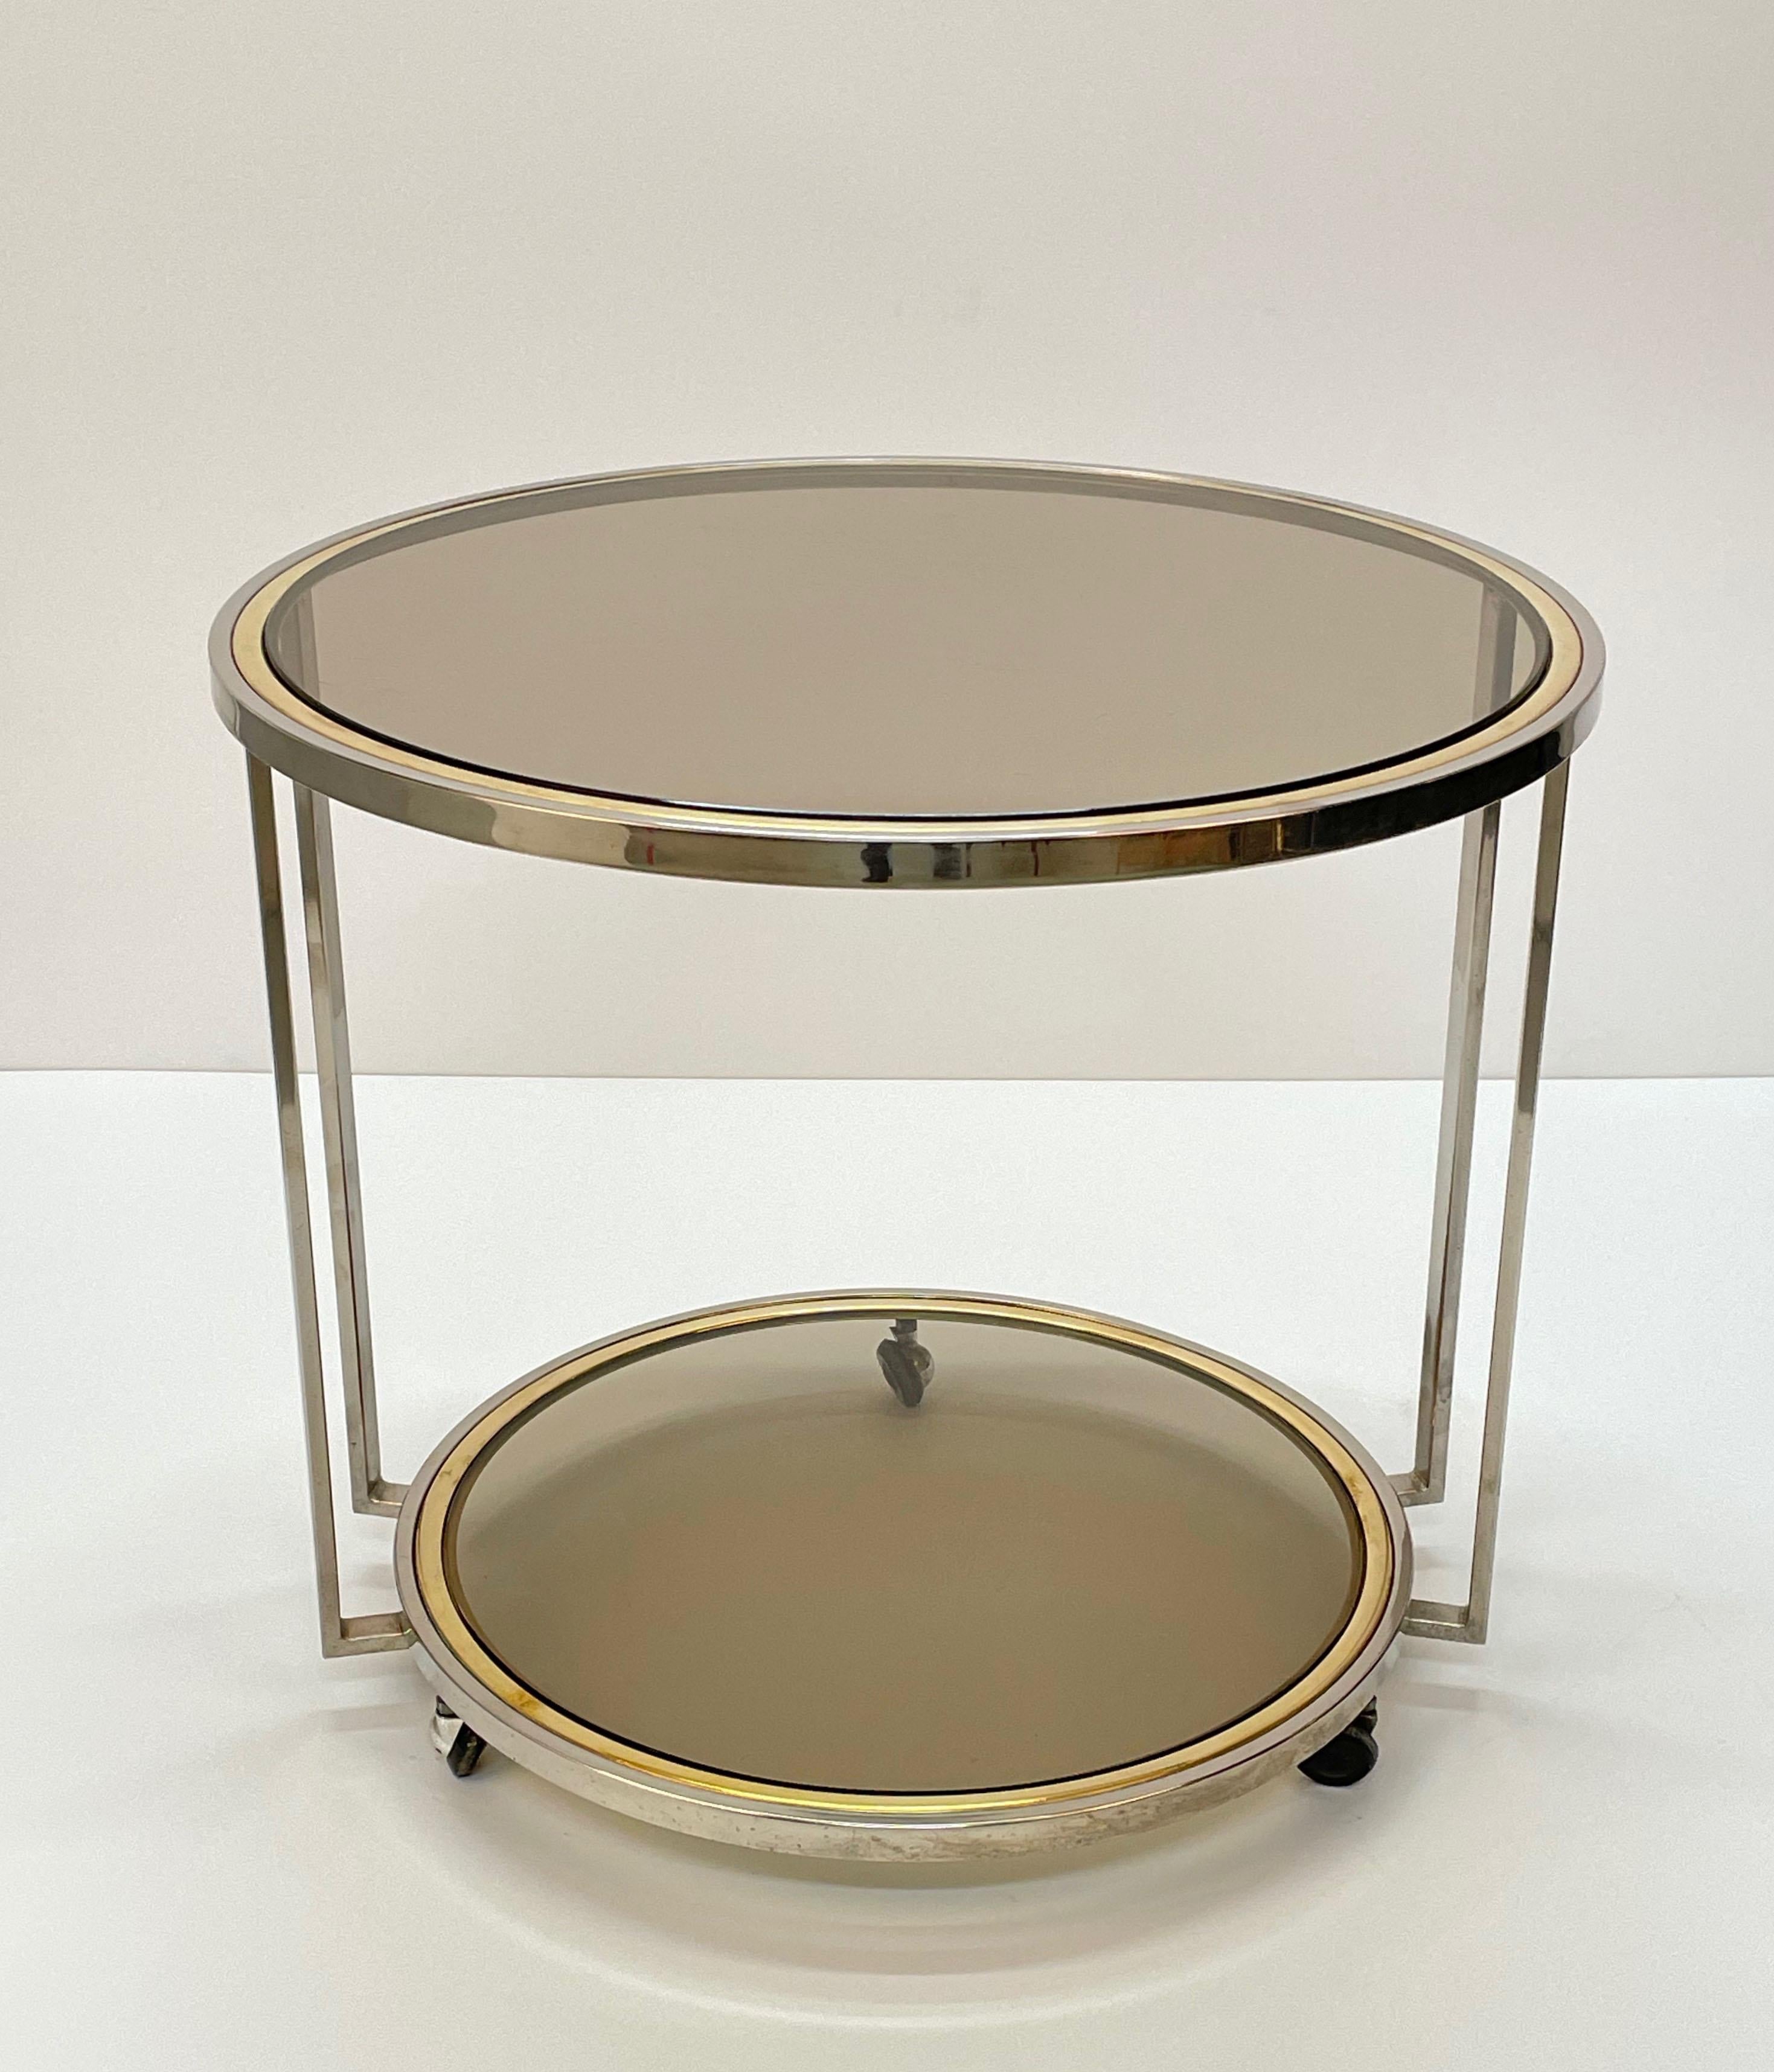 Midcentury Brass and Chrome and Glass Italian Coffee Table after Romeo Rega 1970 For Sale 3